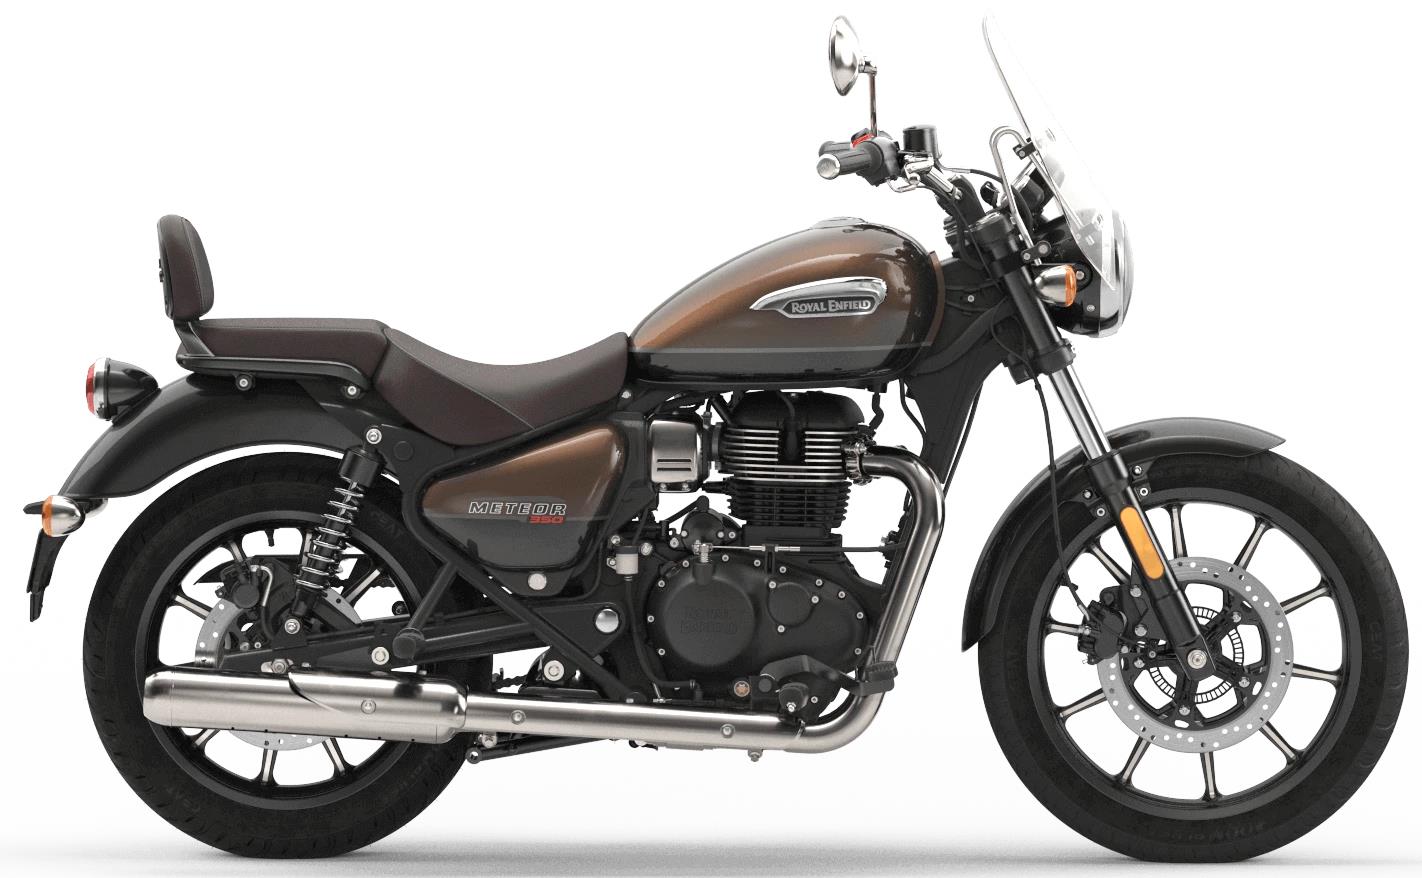 Top 20 Best Bikes Under INR 2 Lakh in India